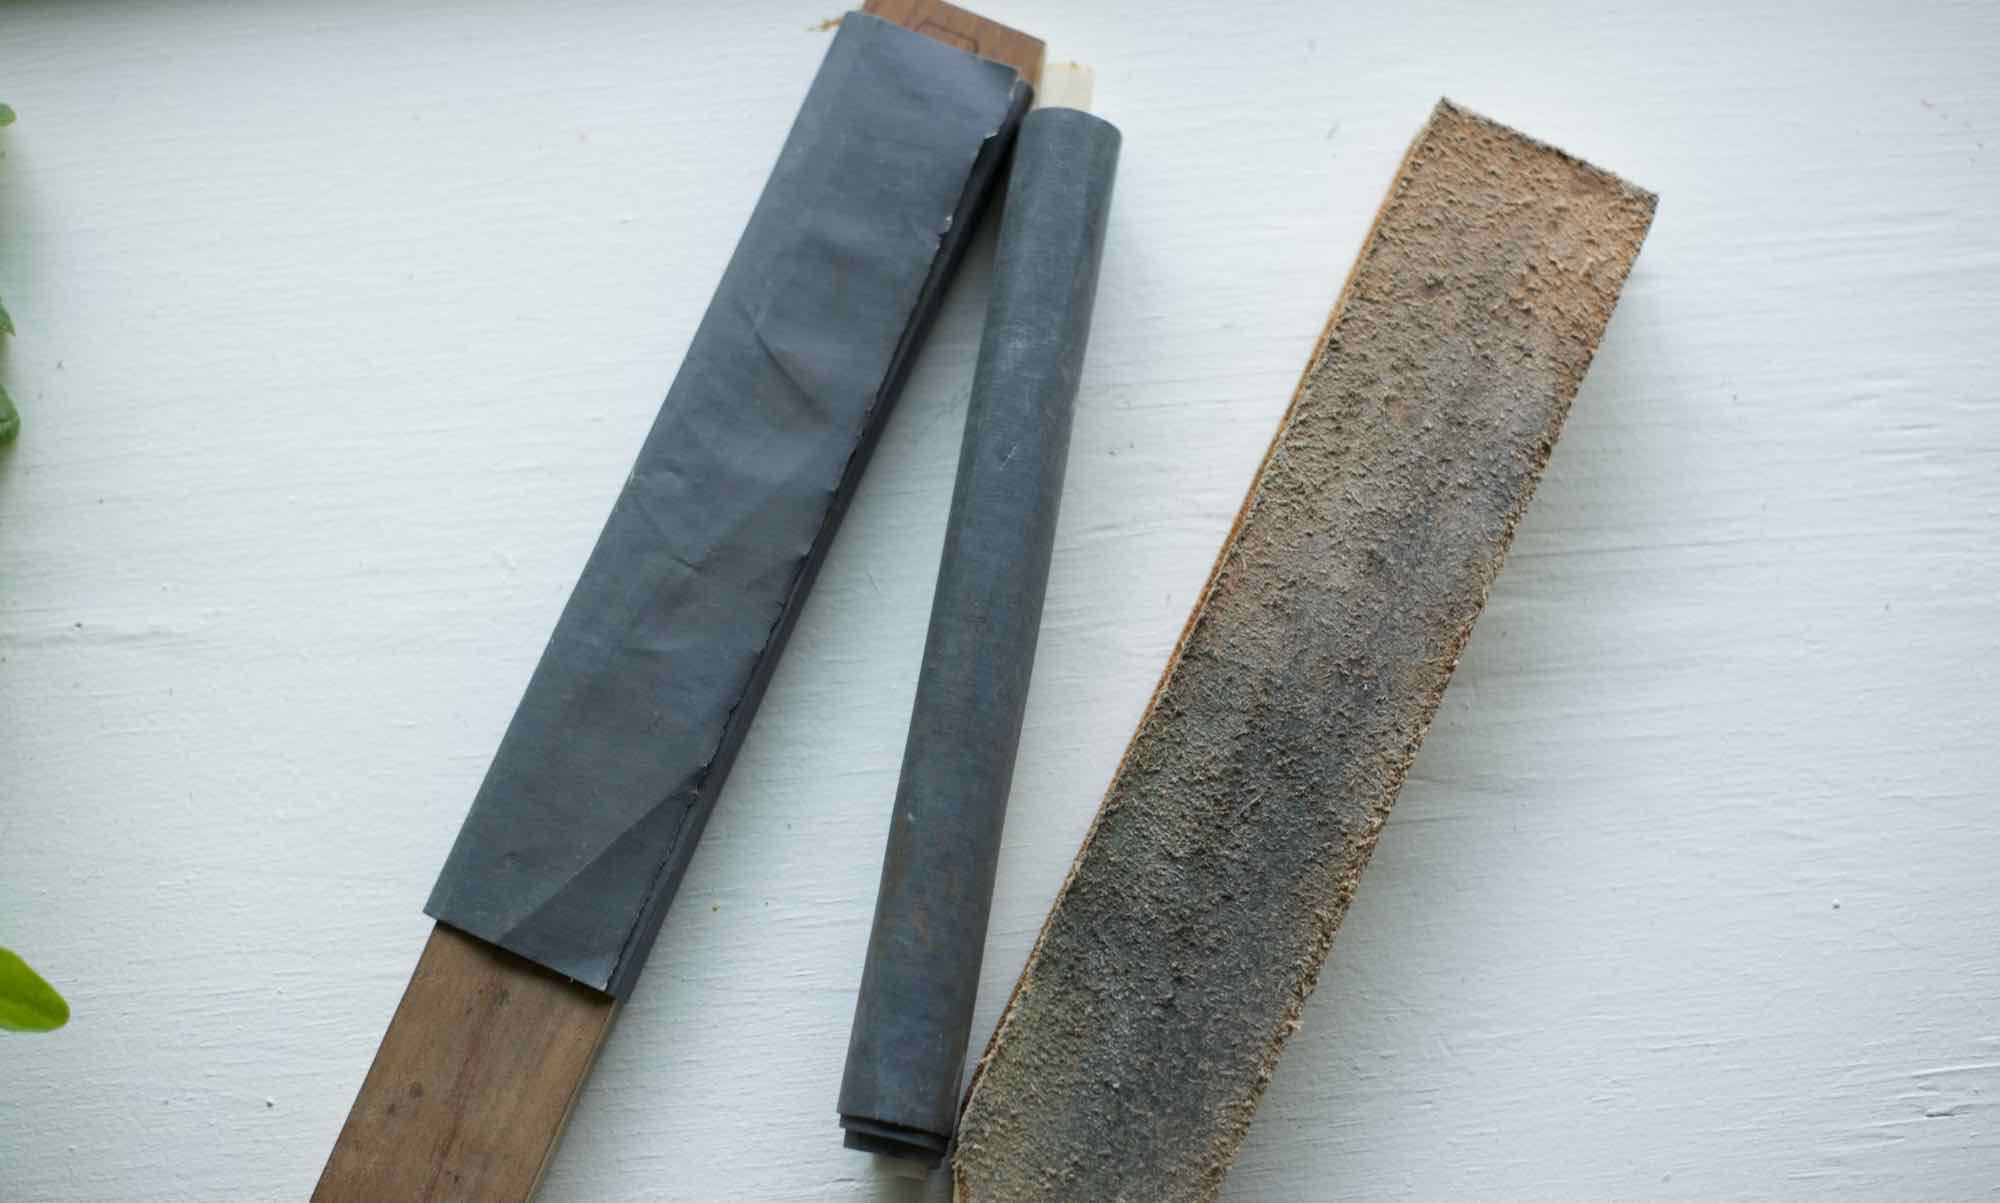 Sandpaper and a Leather Strop